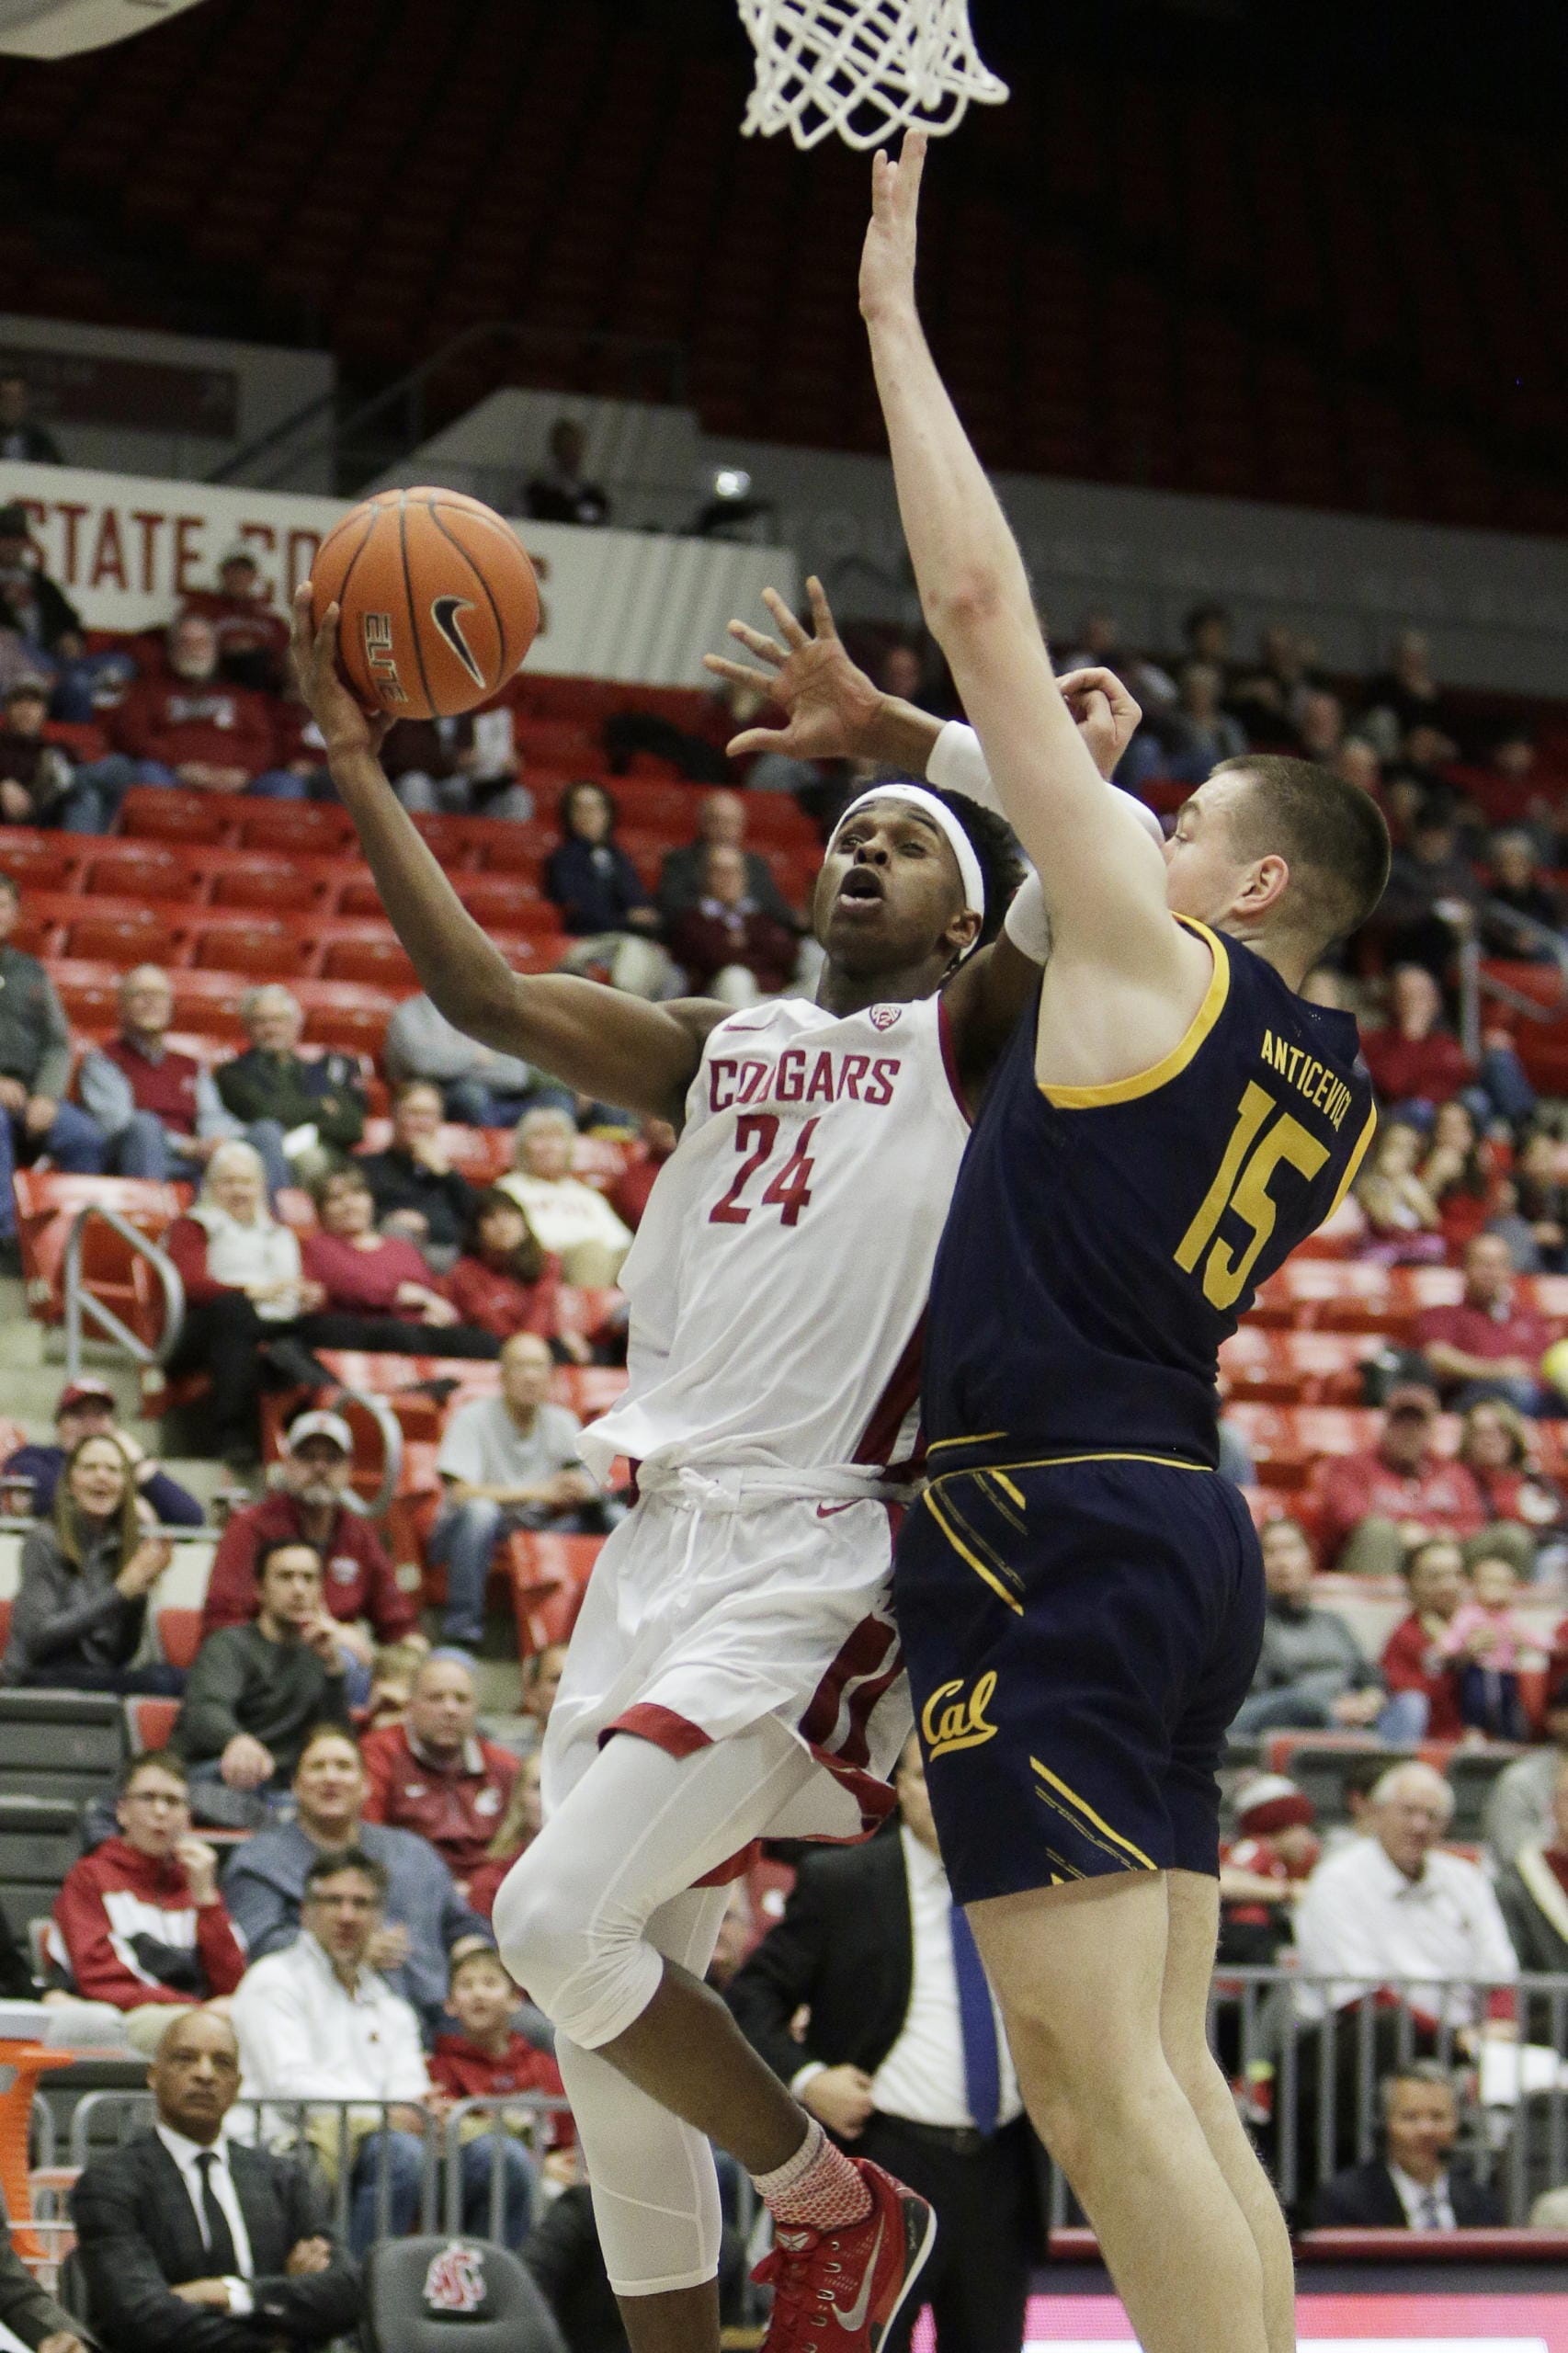 Washington State guard Noah Williams (24) is fouled by California forward Grant Anticevich (15) on a drive to the basket during the first half of an NCAA college basketball game in Pullman, Wash., Wednesday, Feb. 19, 2020.